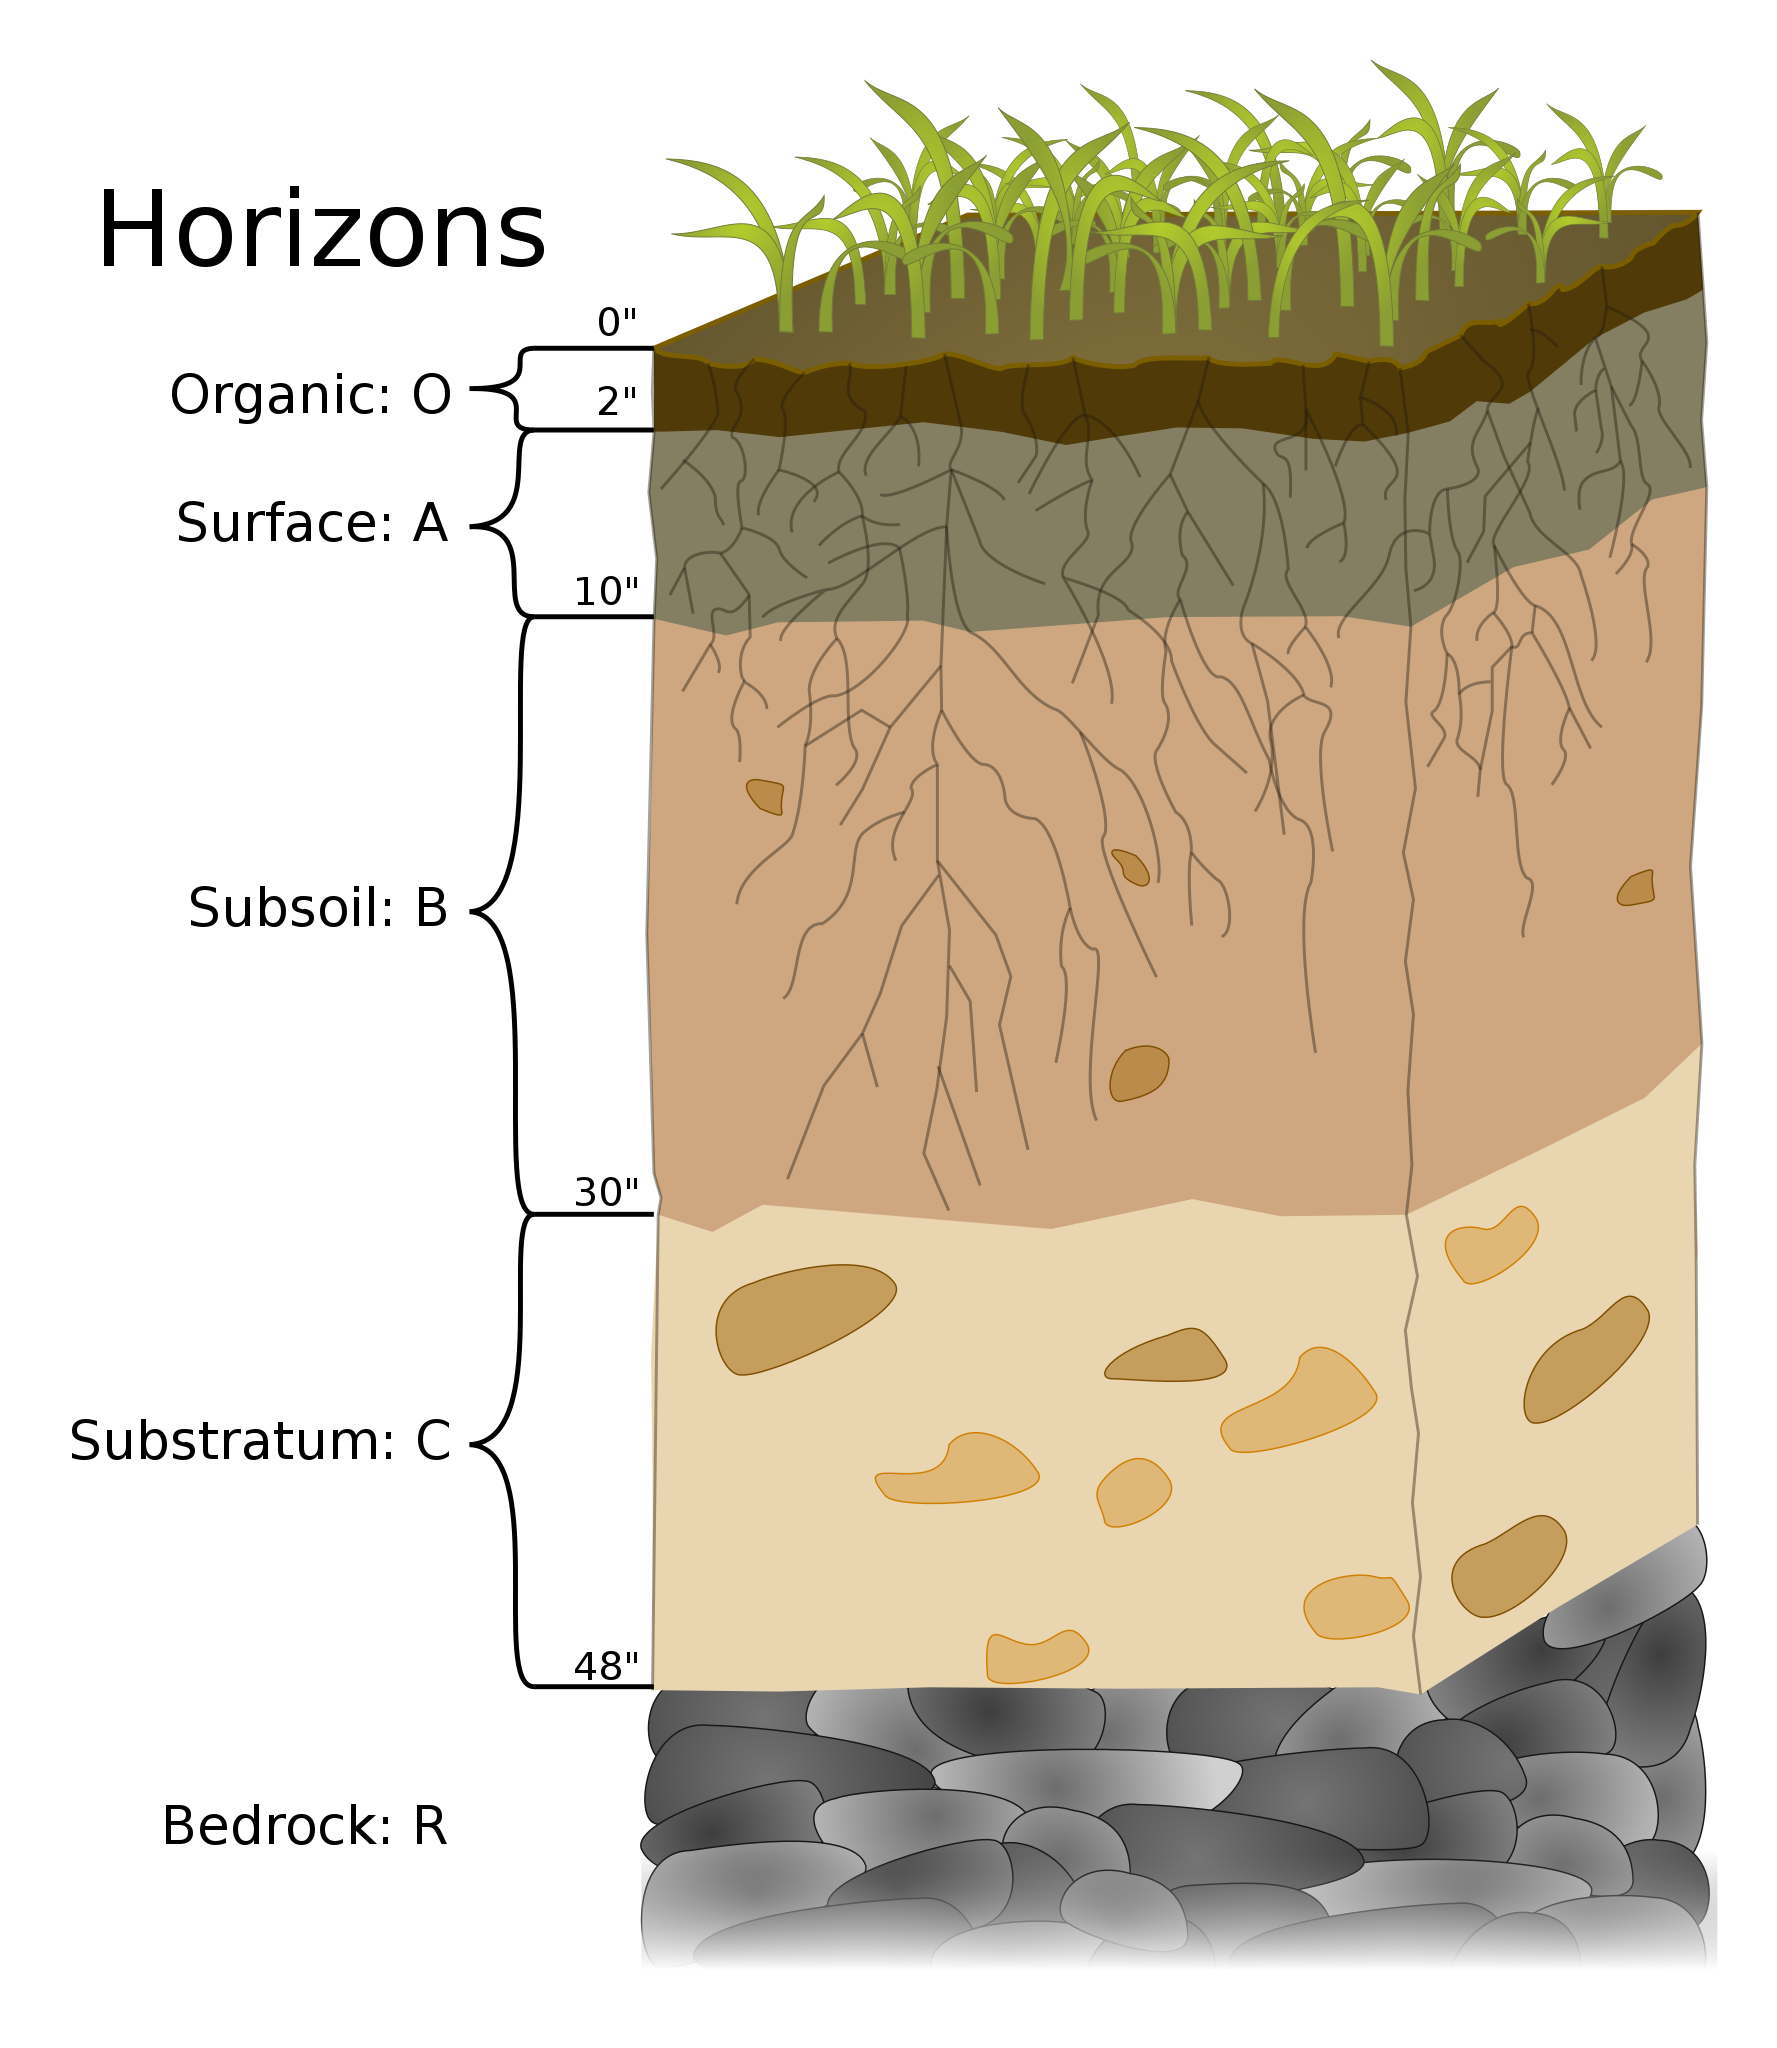 Block diagram of soil horizons: the top layer goes from 0 inches at the surface down to 2 inches into the ground and has plants on top; the layer is dark brown in color, labeled Organic: O. The layer below goes from 2 to 10 inches depth and has abundant plant roots branching down through the layer; the layer is gray in color, labeled Surface: A. The layer below goes from 10 to 30 inches depth and has fewer, deeper roots branching through the layer and also contains sparse larger rock clasts; the layer is dark tan in color, labeled Subsoil: B. The layer below goes from 30 to 48 inches depth and does not contain any plant roots but does have more abundant rock clasts than the layer above; the layer is light tan in color, labeled Substratum: C. The bottom layer goes below 48 inches depth and only consists of rock clasts; the layer is dark gray to black in color, labeled Bedrock: R.